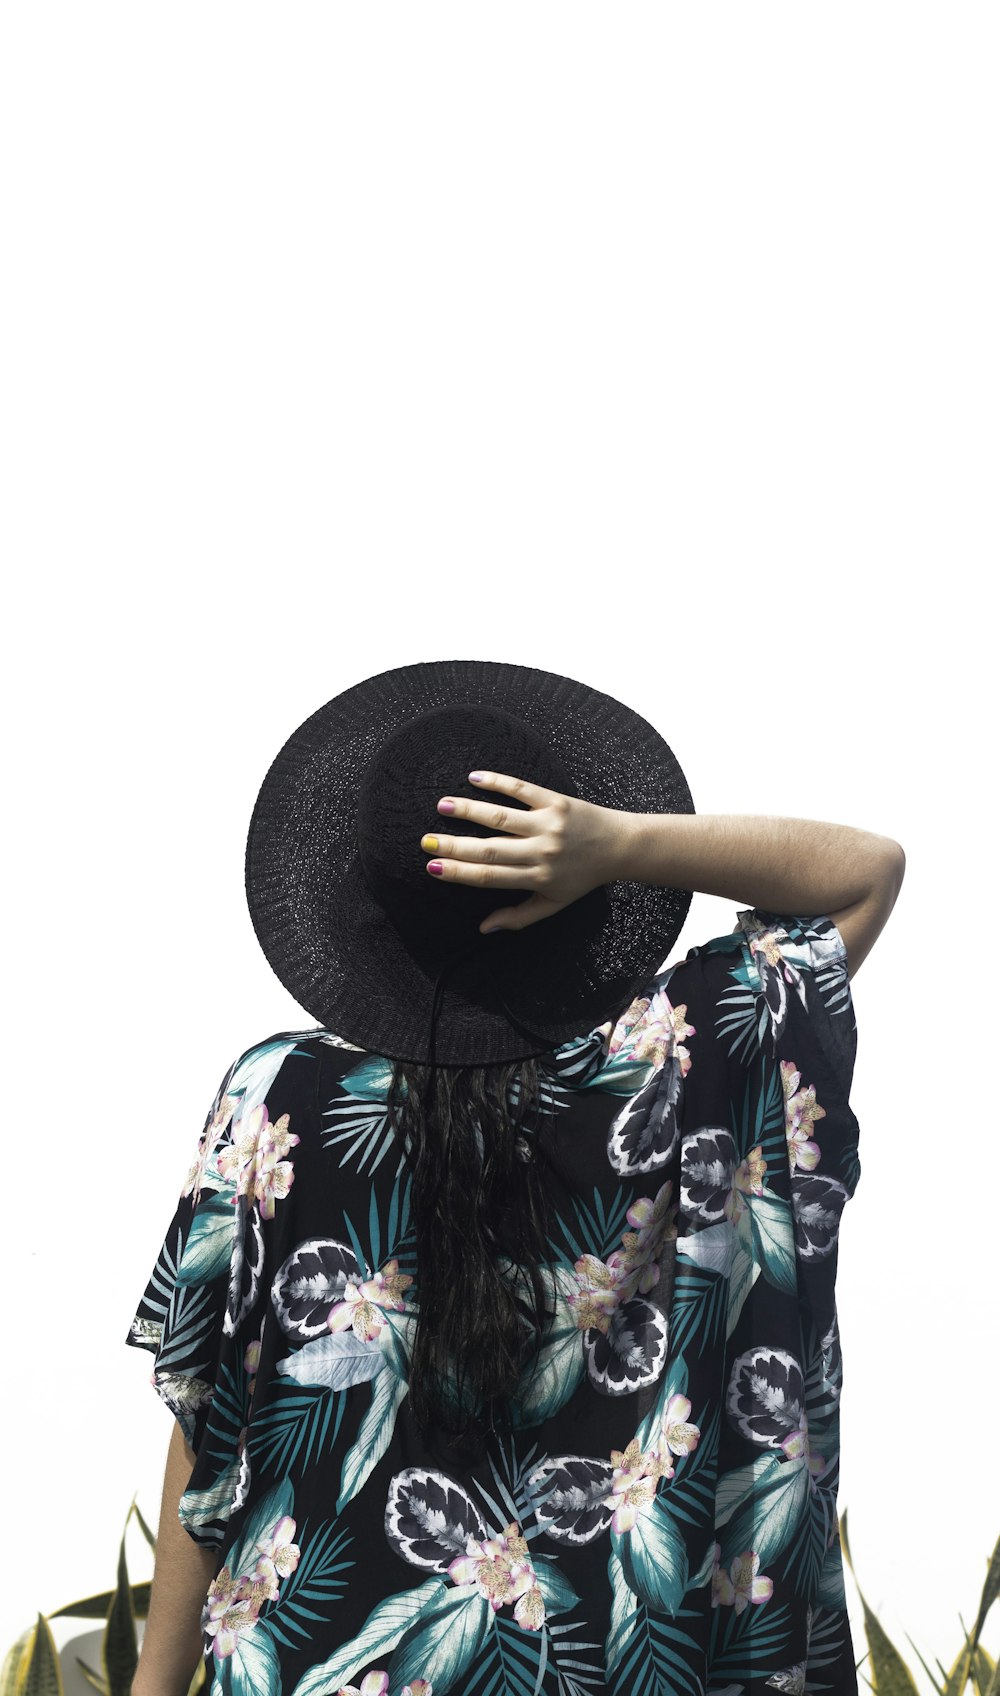 woman in blue white and green floral dress holding black fedora hat